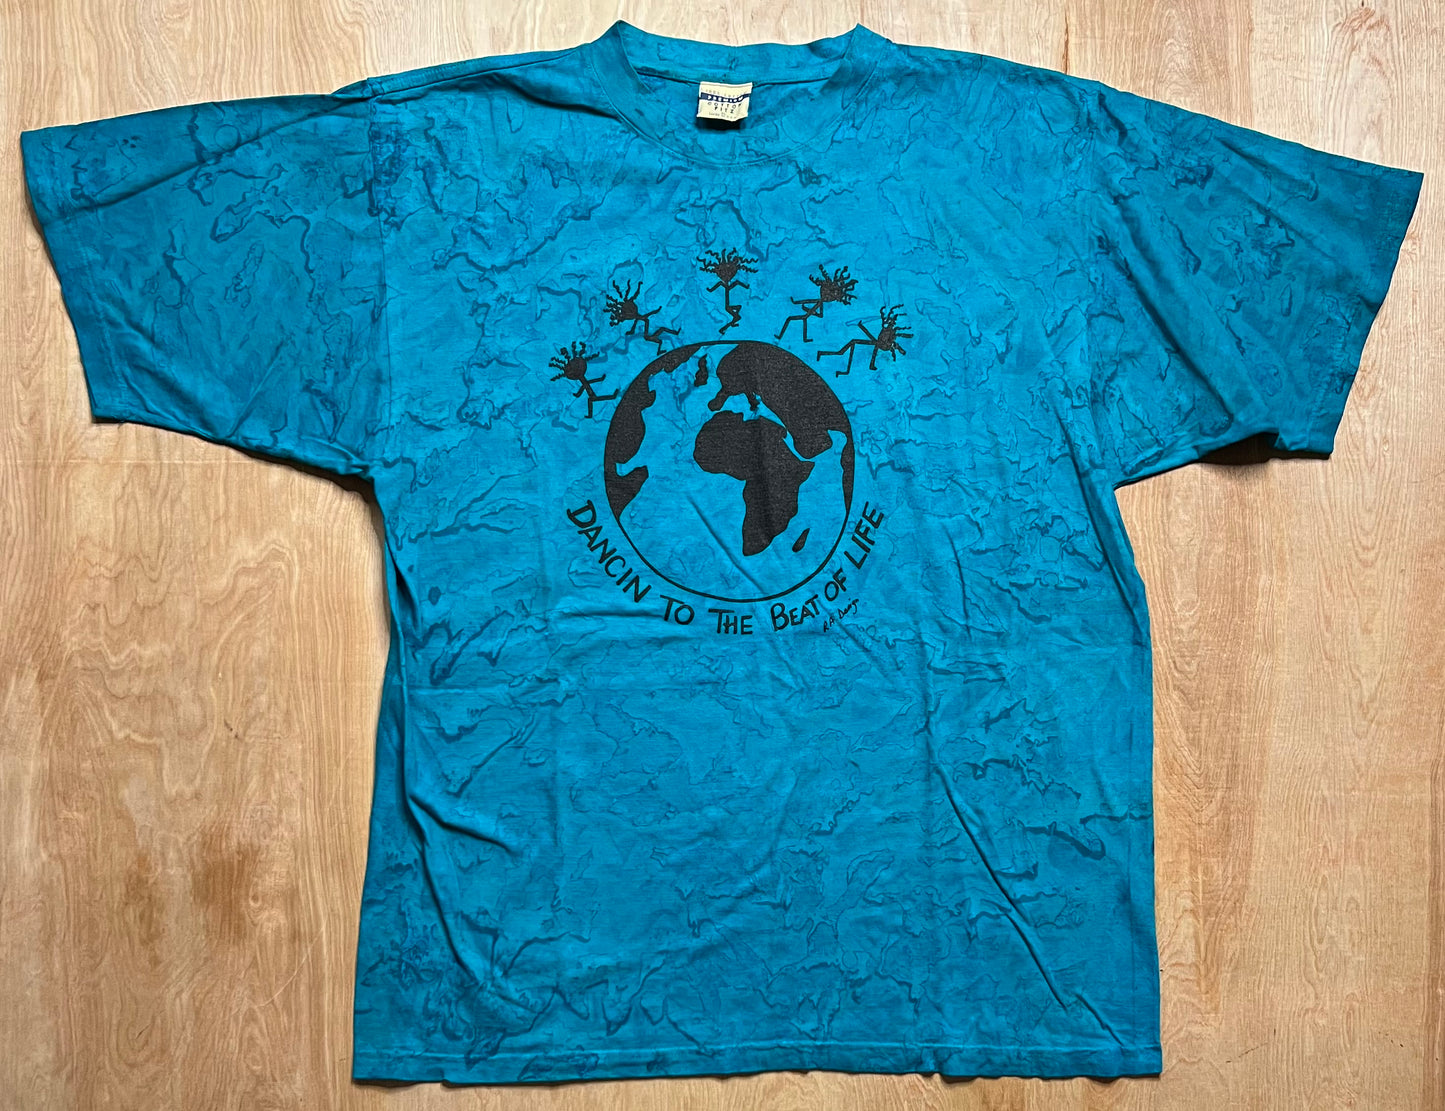 Vintage "Dancin To The Beat of Life" Tie Dye T-Shirt